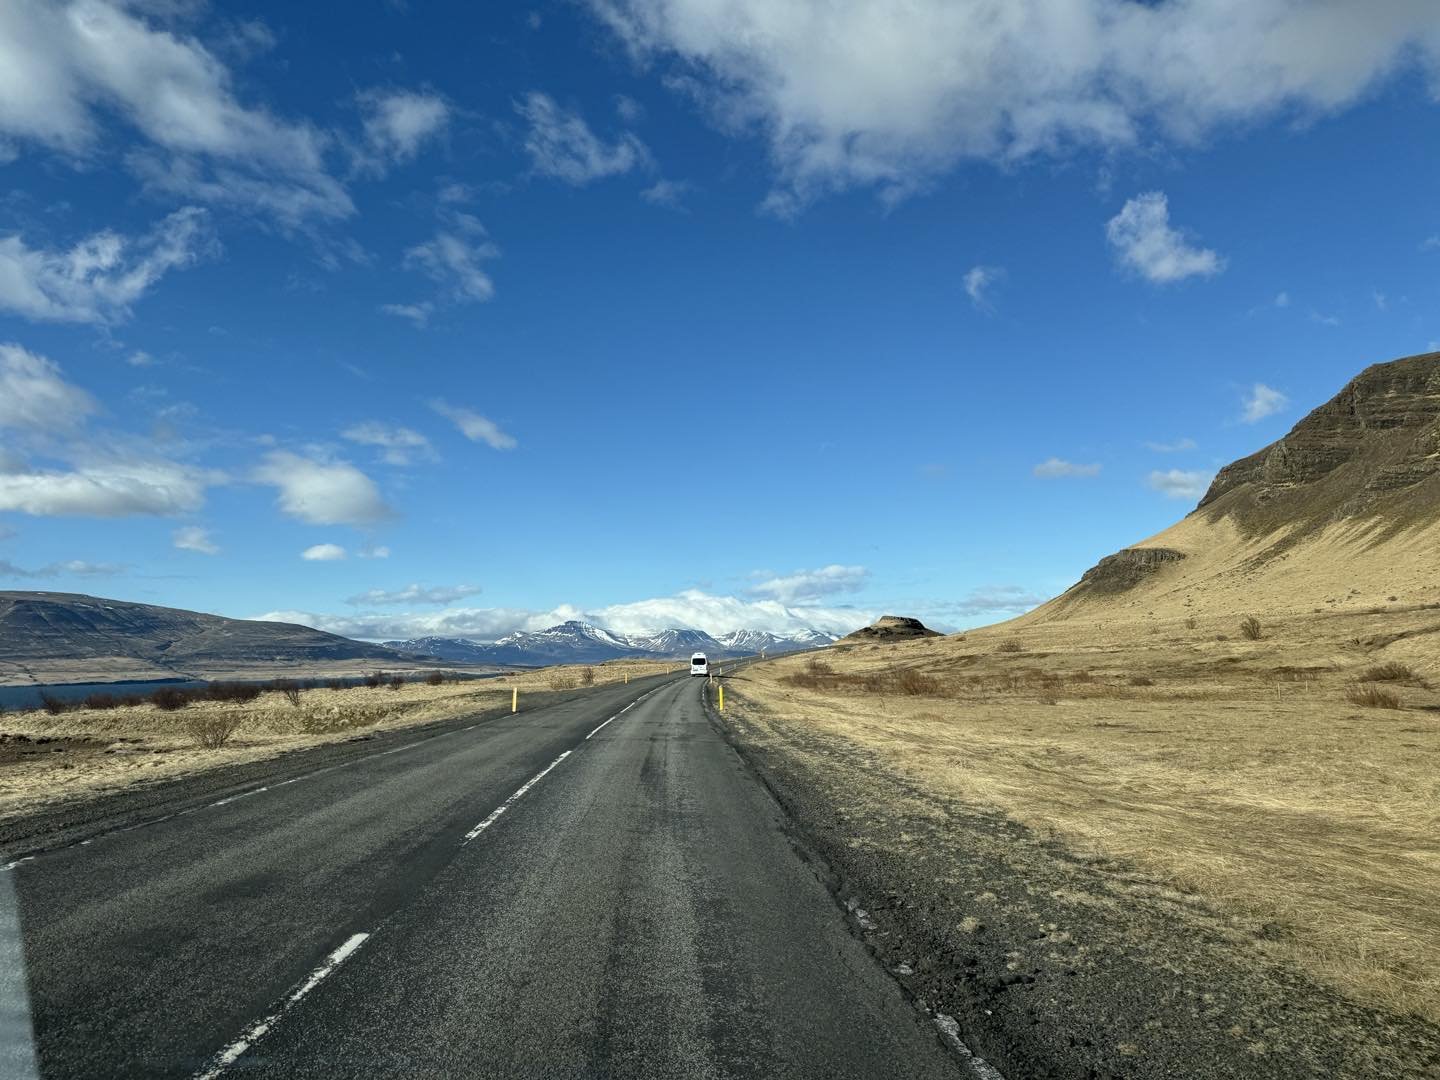 On the road in sunny Iceland